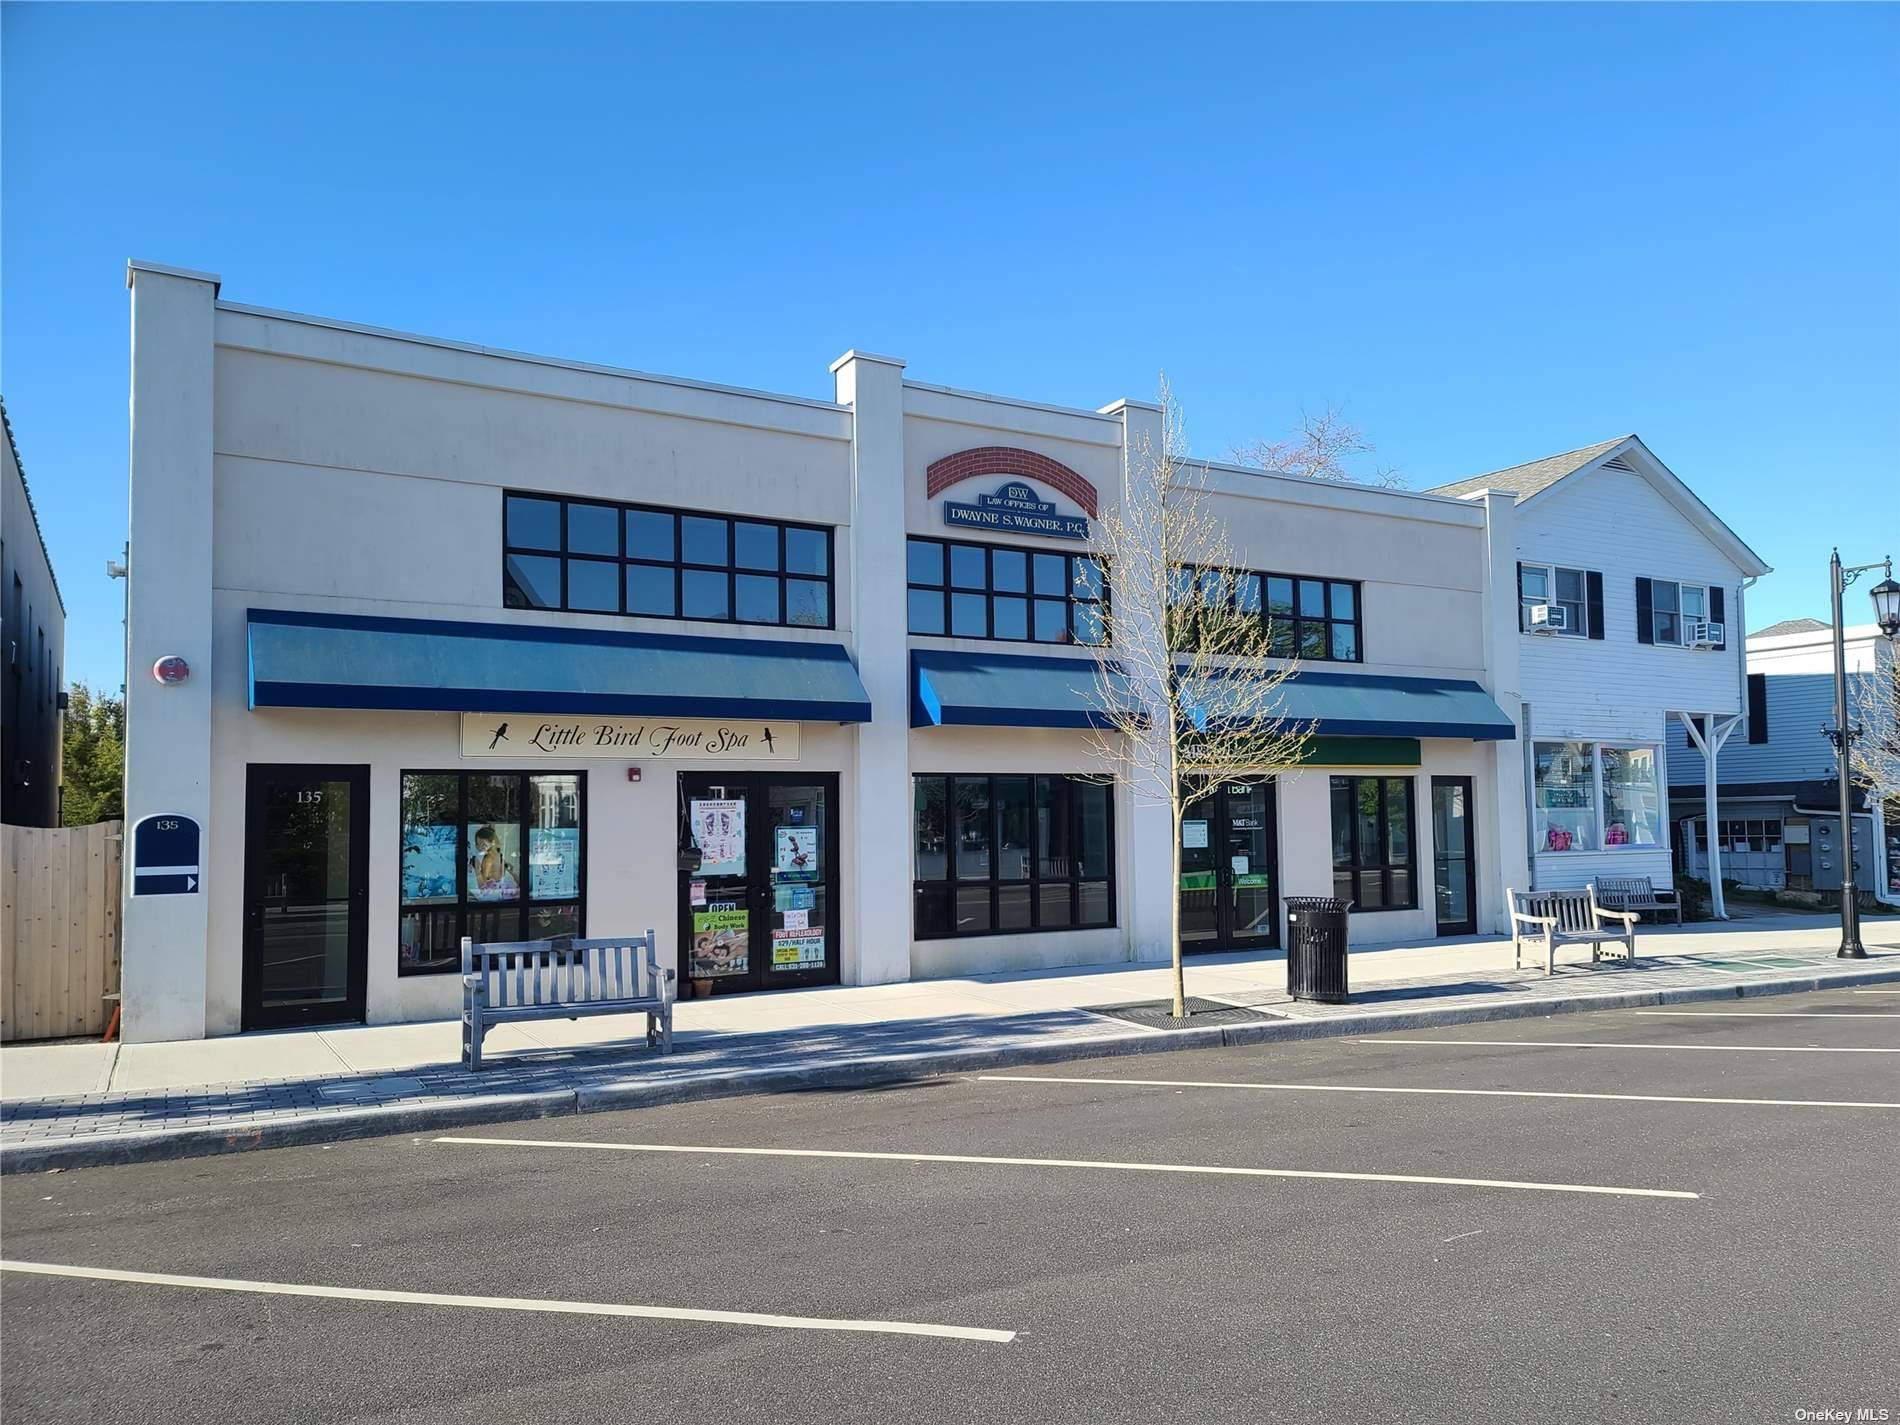 Perfect timing on this rare commercial lease opportunity located in the heart of the Village of Westhampton Beach business district.